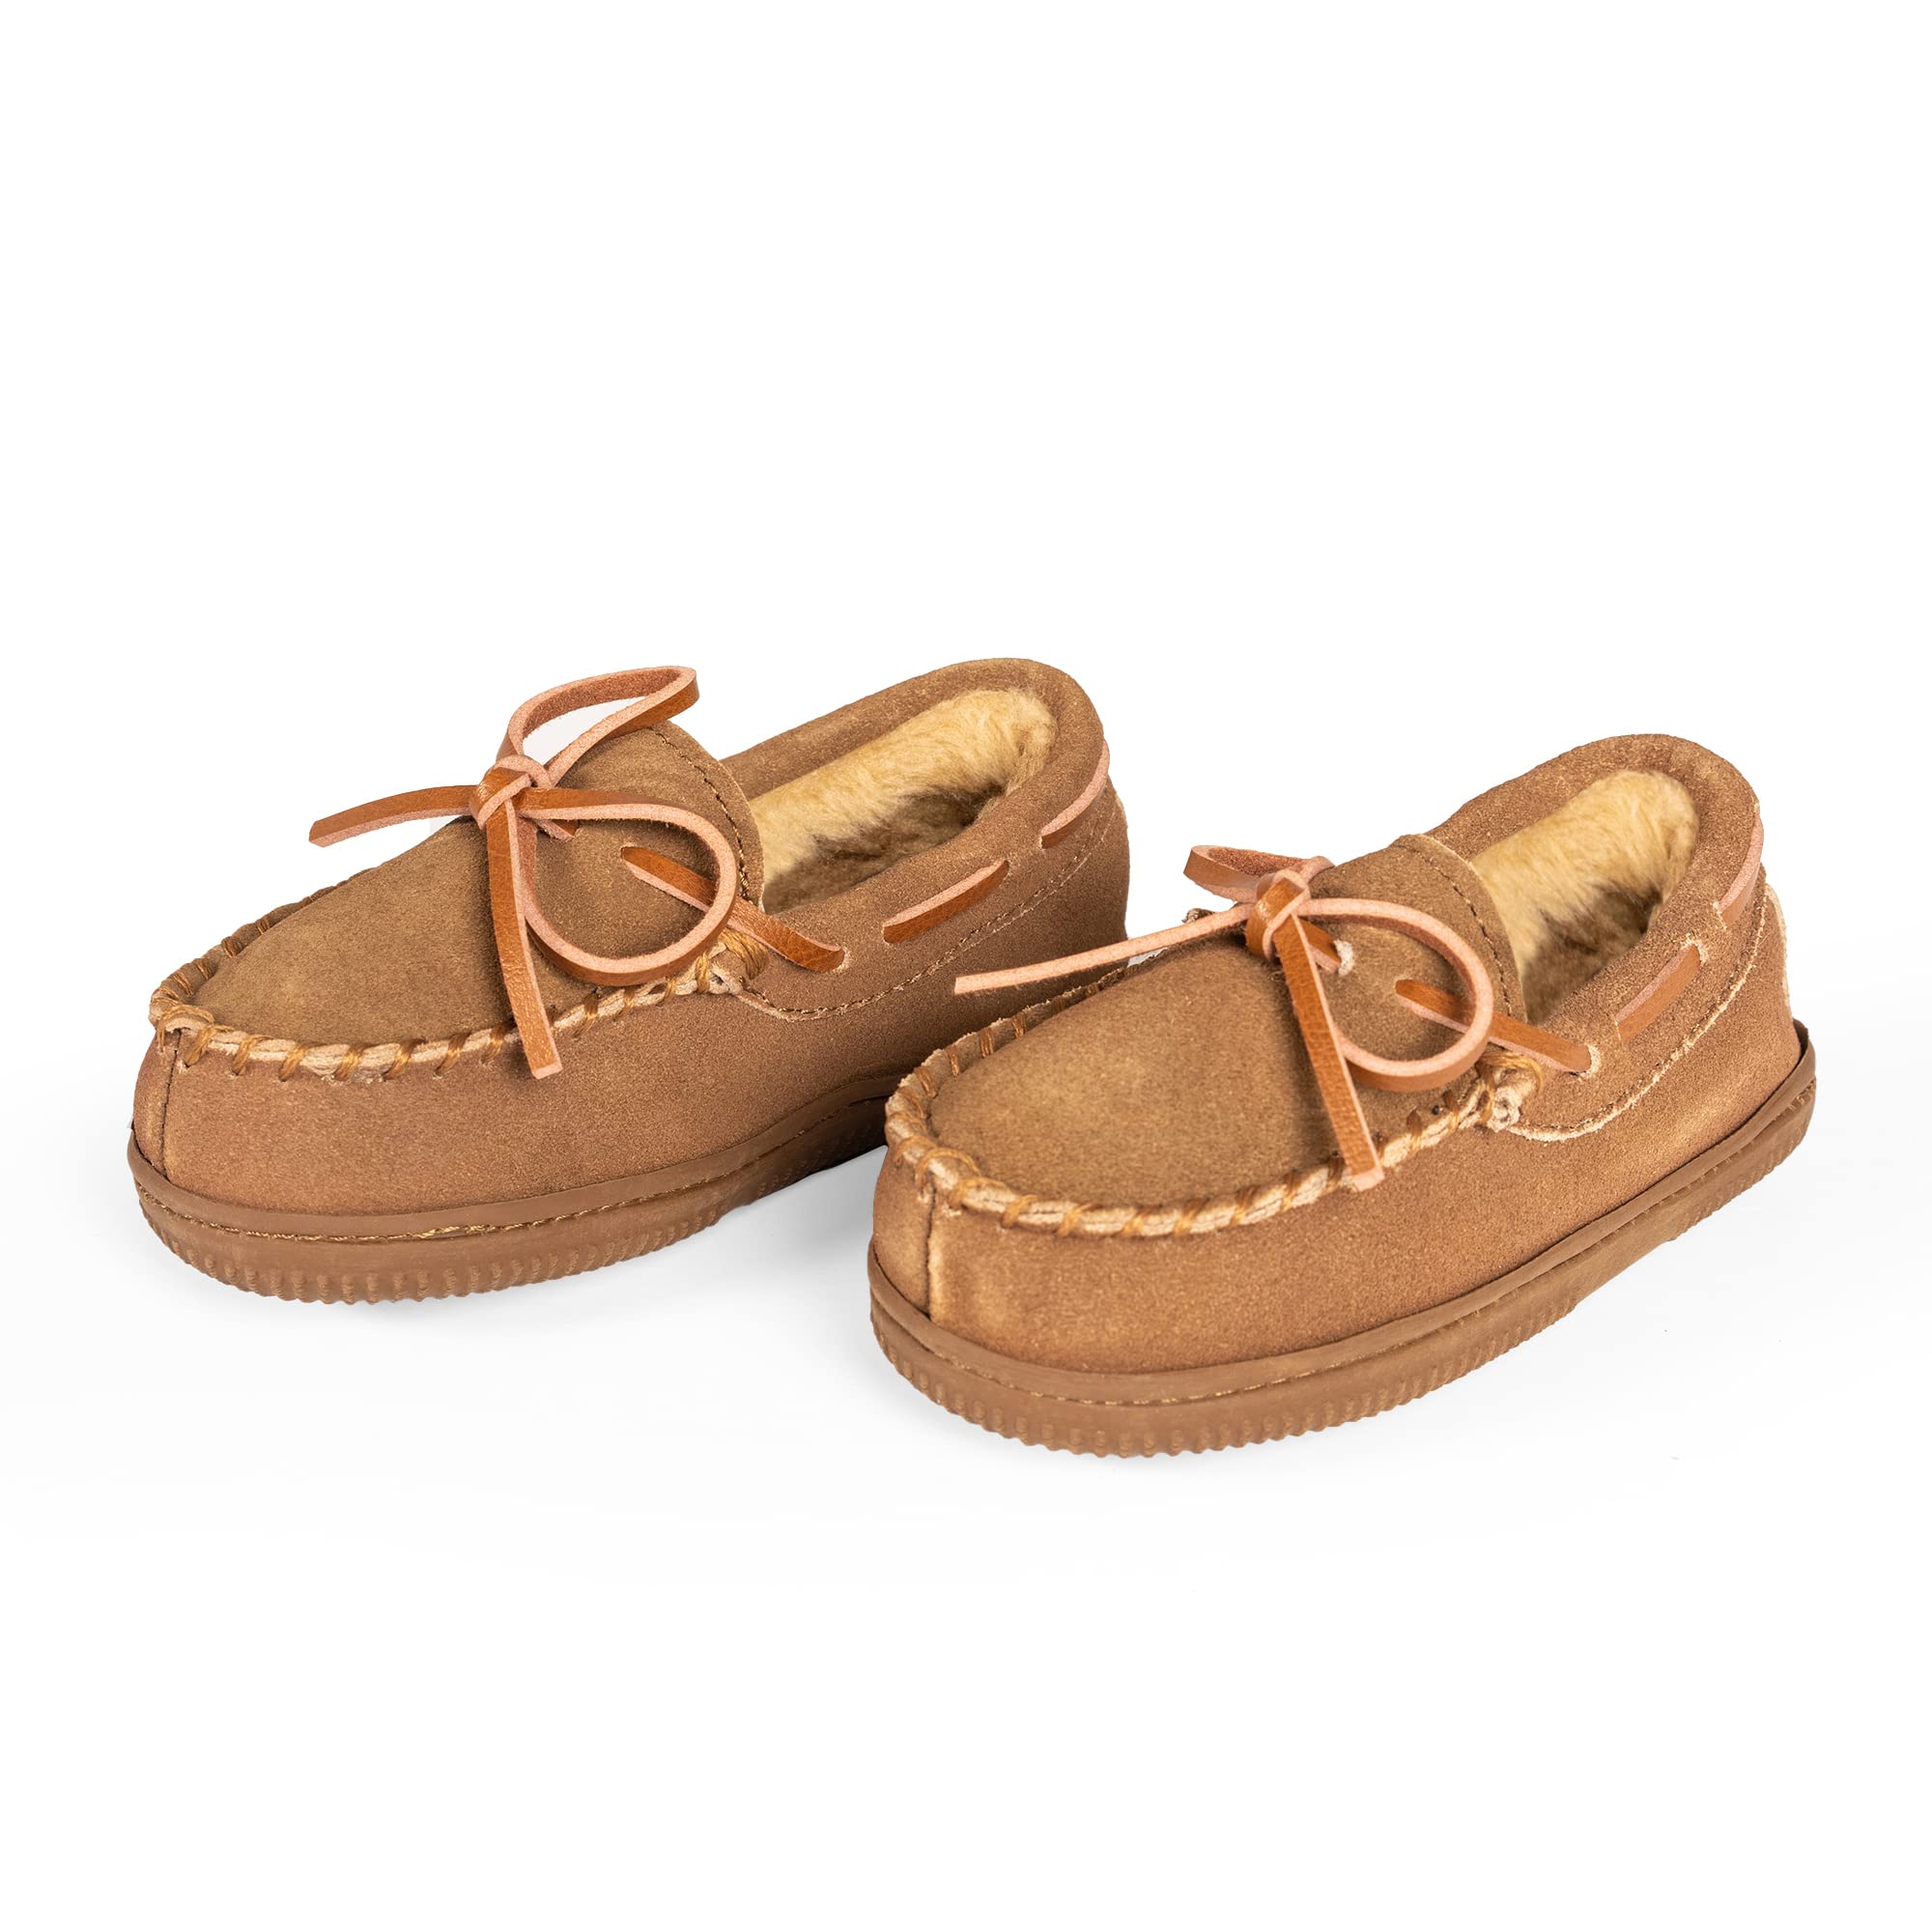 NORTY Toddler Moccasin Slippers - Kids' Slippers - Girls' and Boys' Slippers for Kids - Toddler Slippers Girls and Boys - Kids' Slippers Girls and Boys - Suede